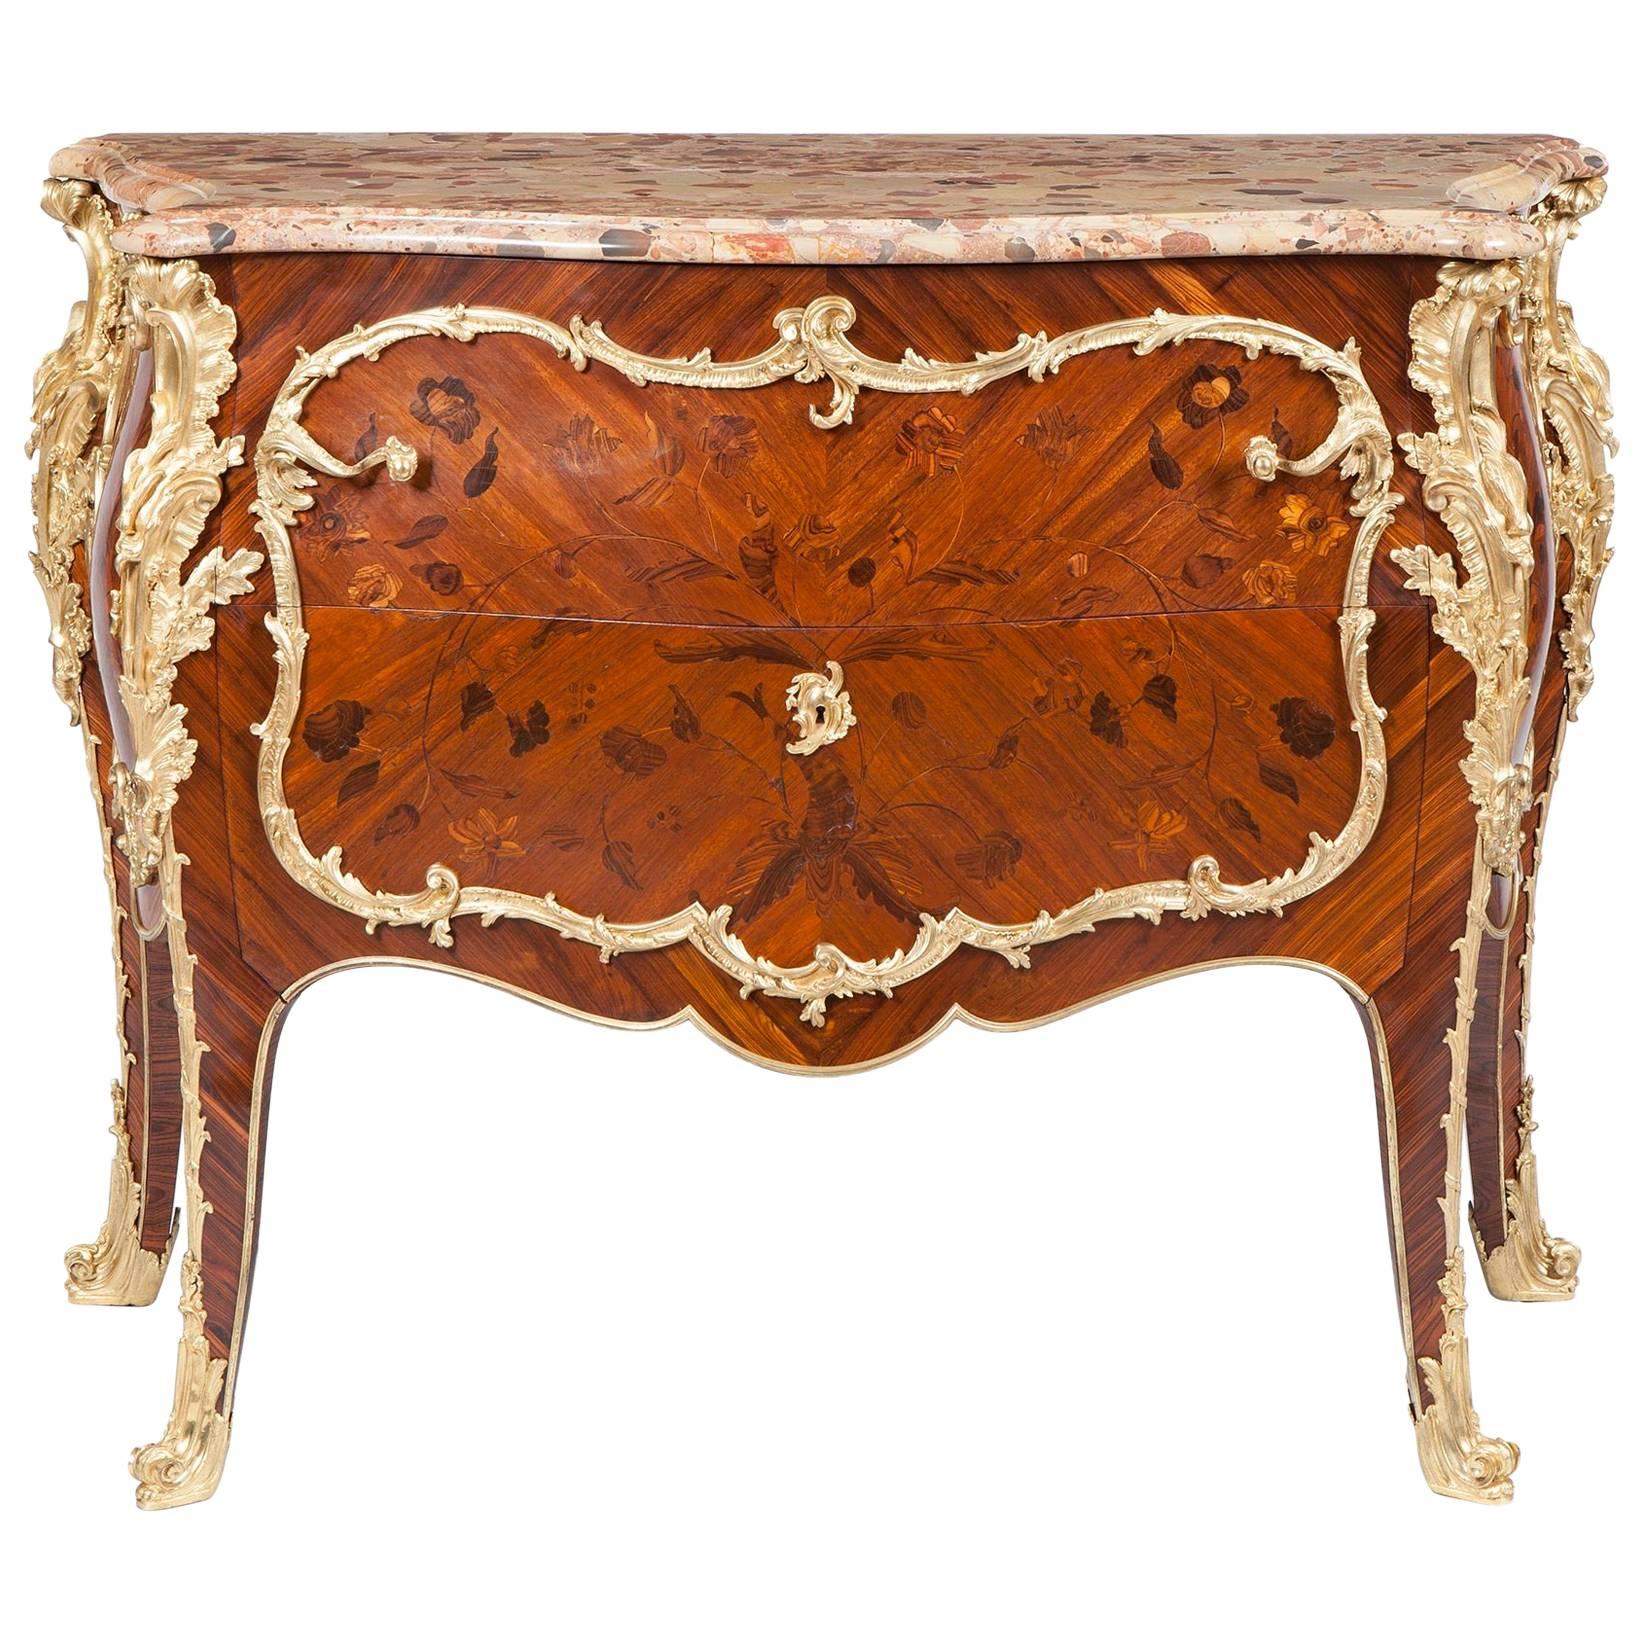 19th Century French Commode in the Louis XV Manner by Maison Rogié